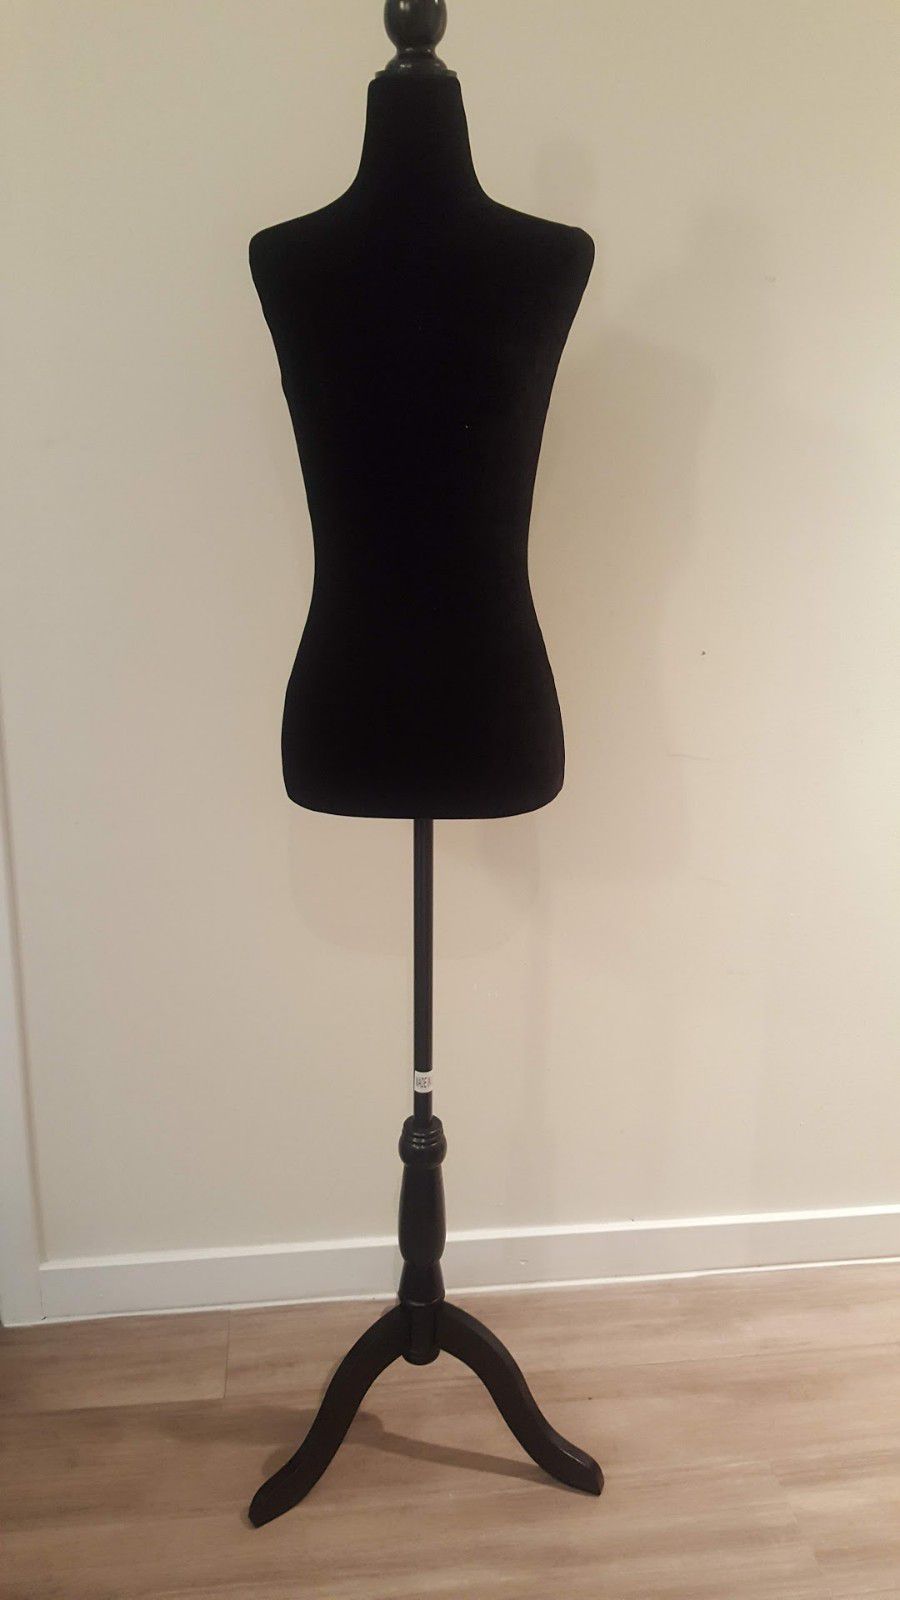 Torso Female Clothing Tripod Stand. Make an Offer $